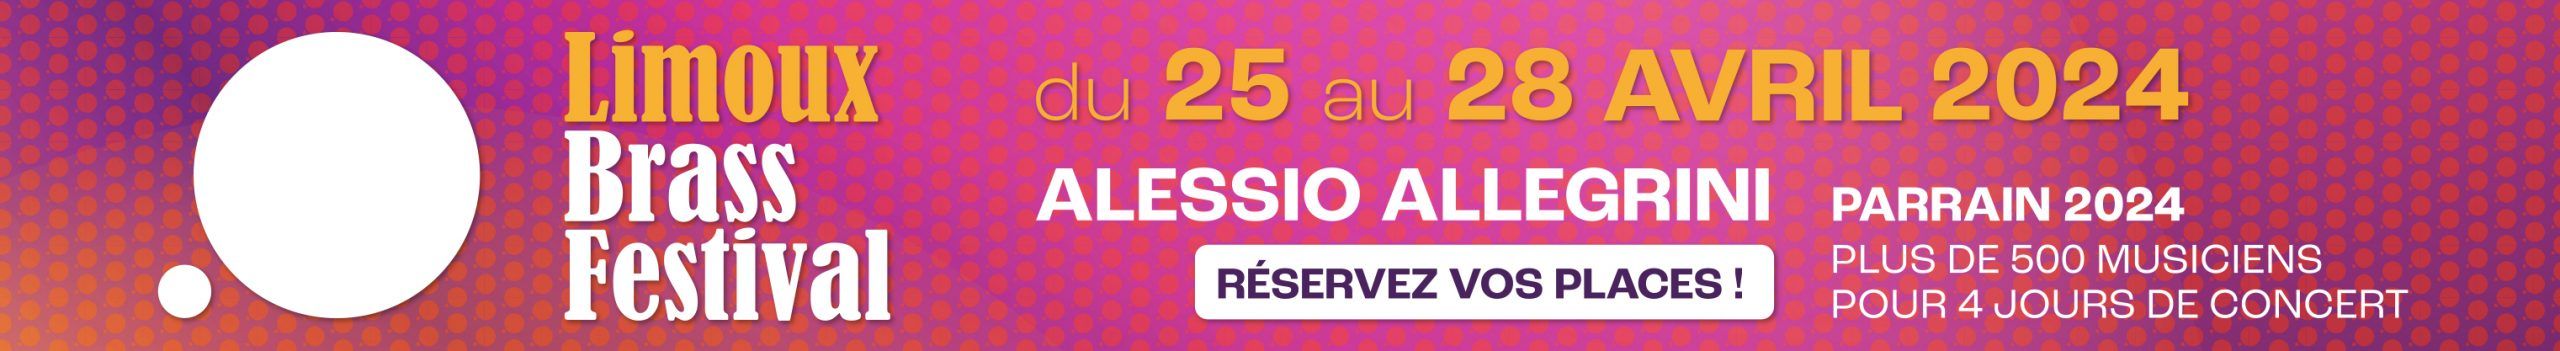 Limoux Brass Festival – Edition 2024